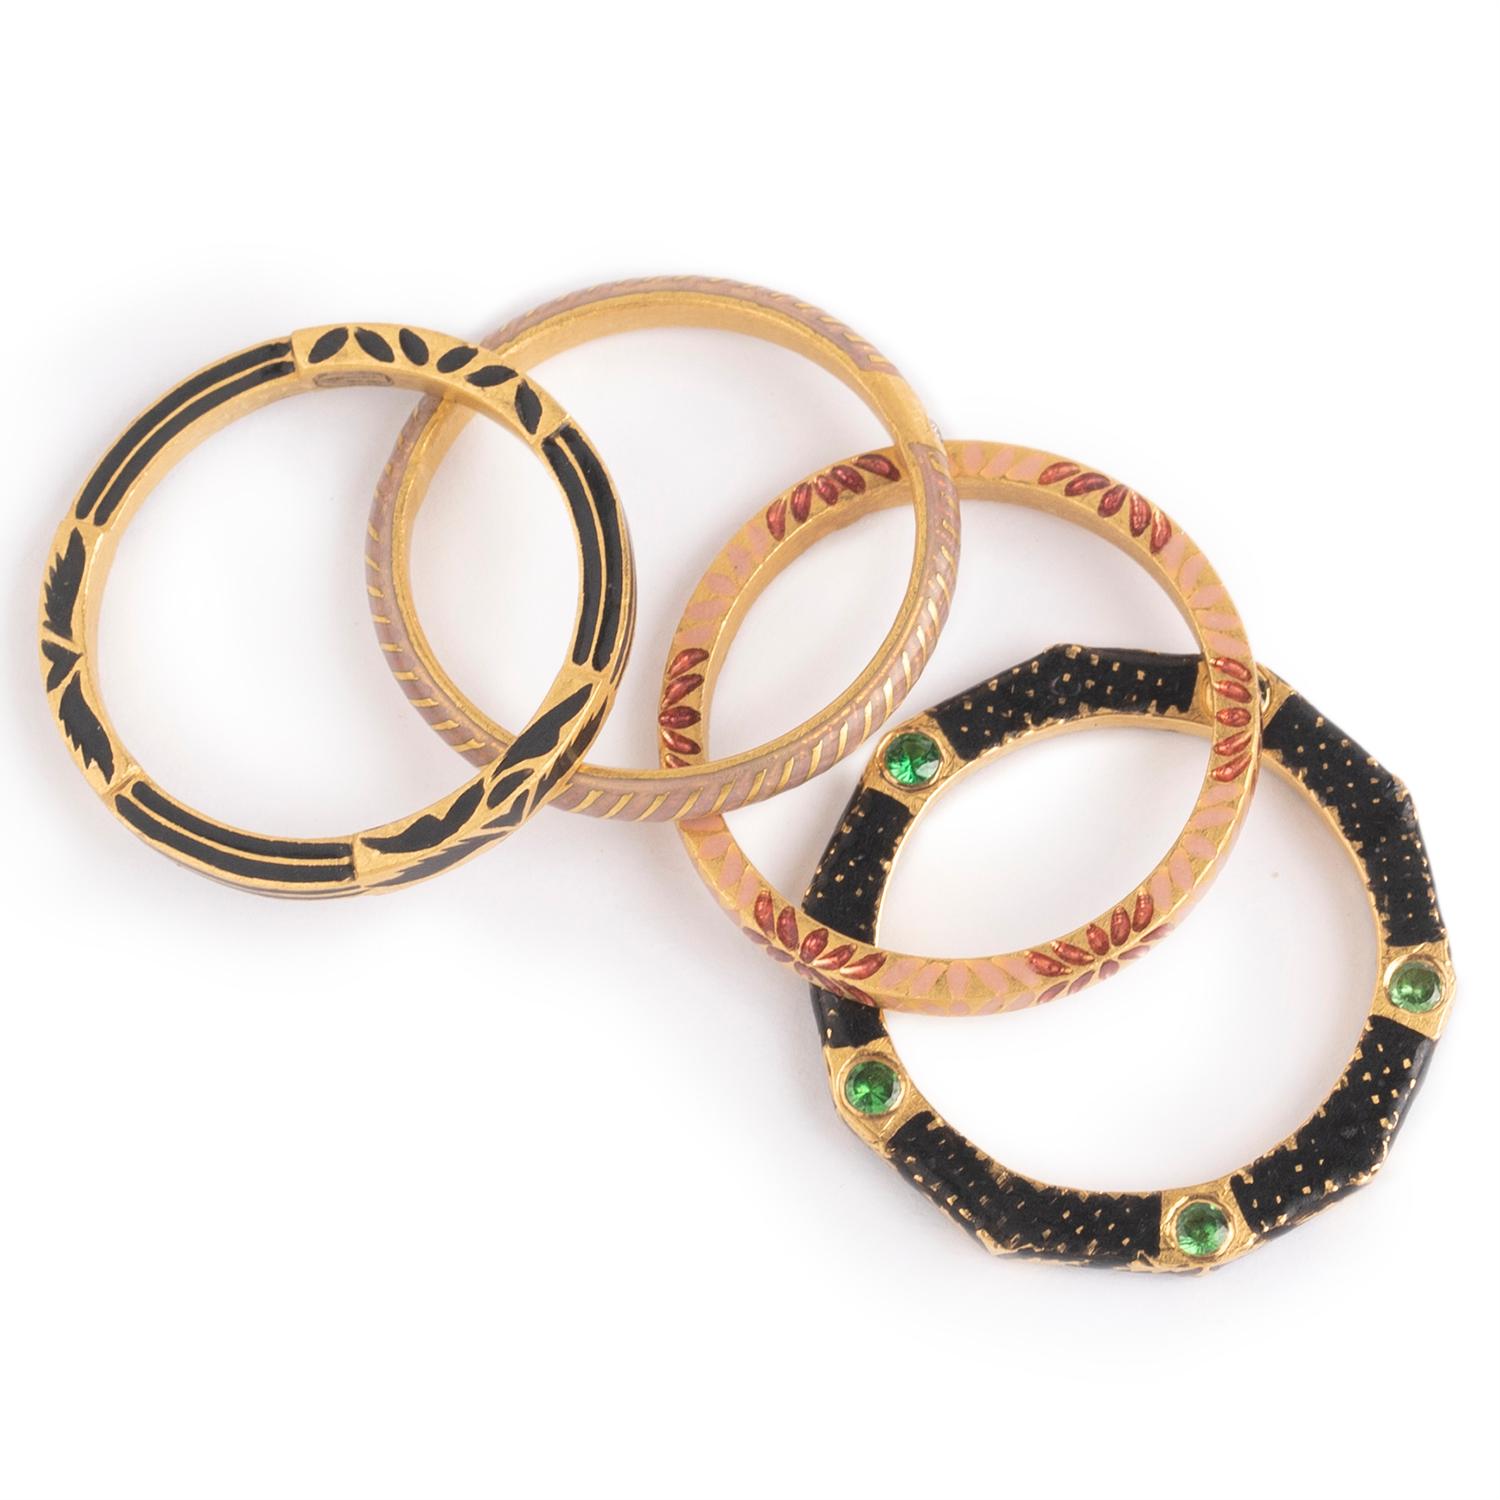 For Sale:  22K Gold Handmade Floral Enamel Stackable Infinity Band Rings Set of 4 by Agaro 5